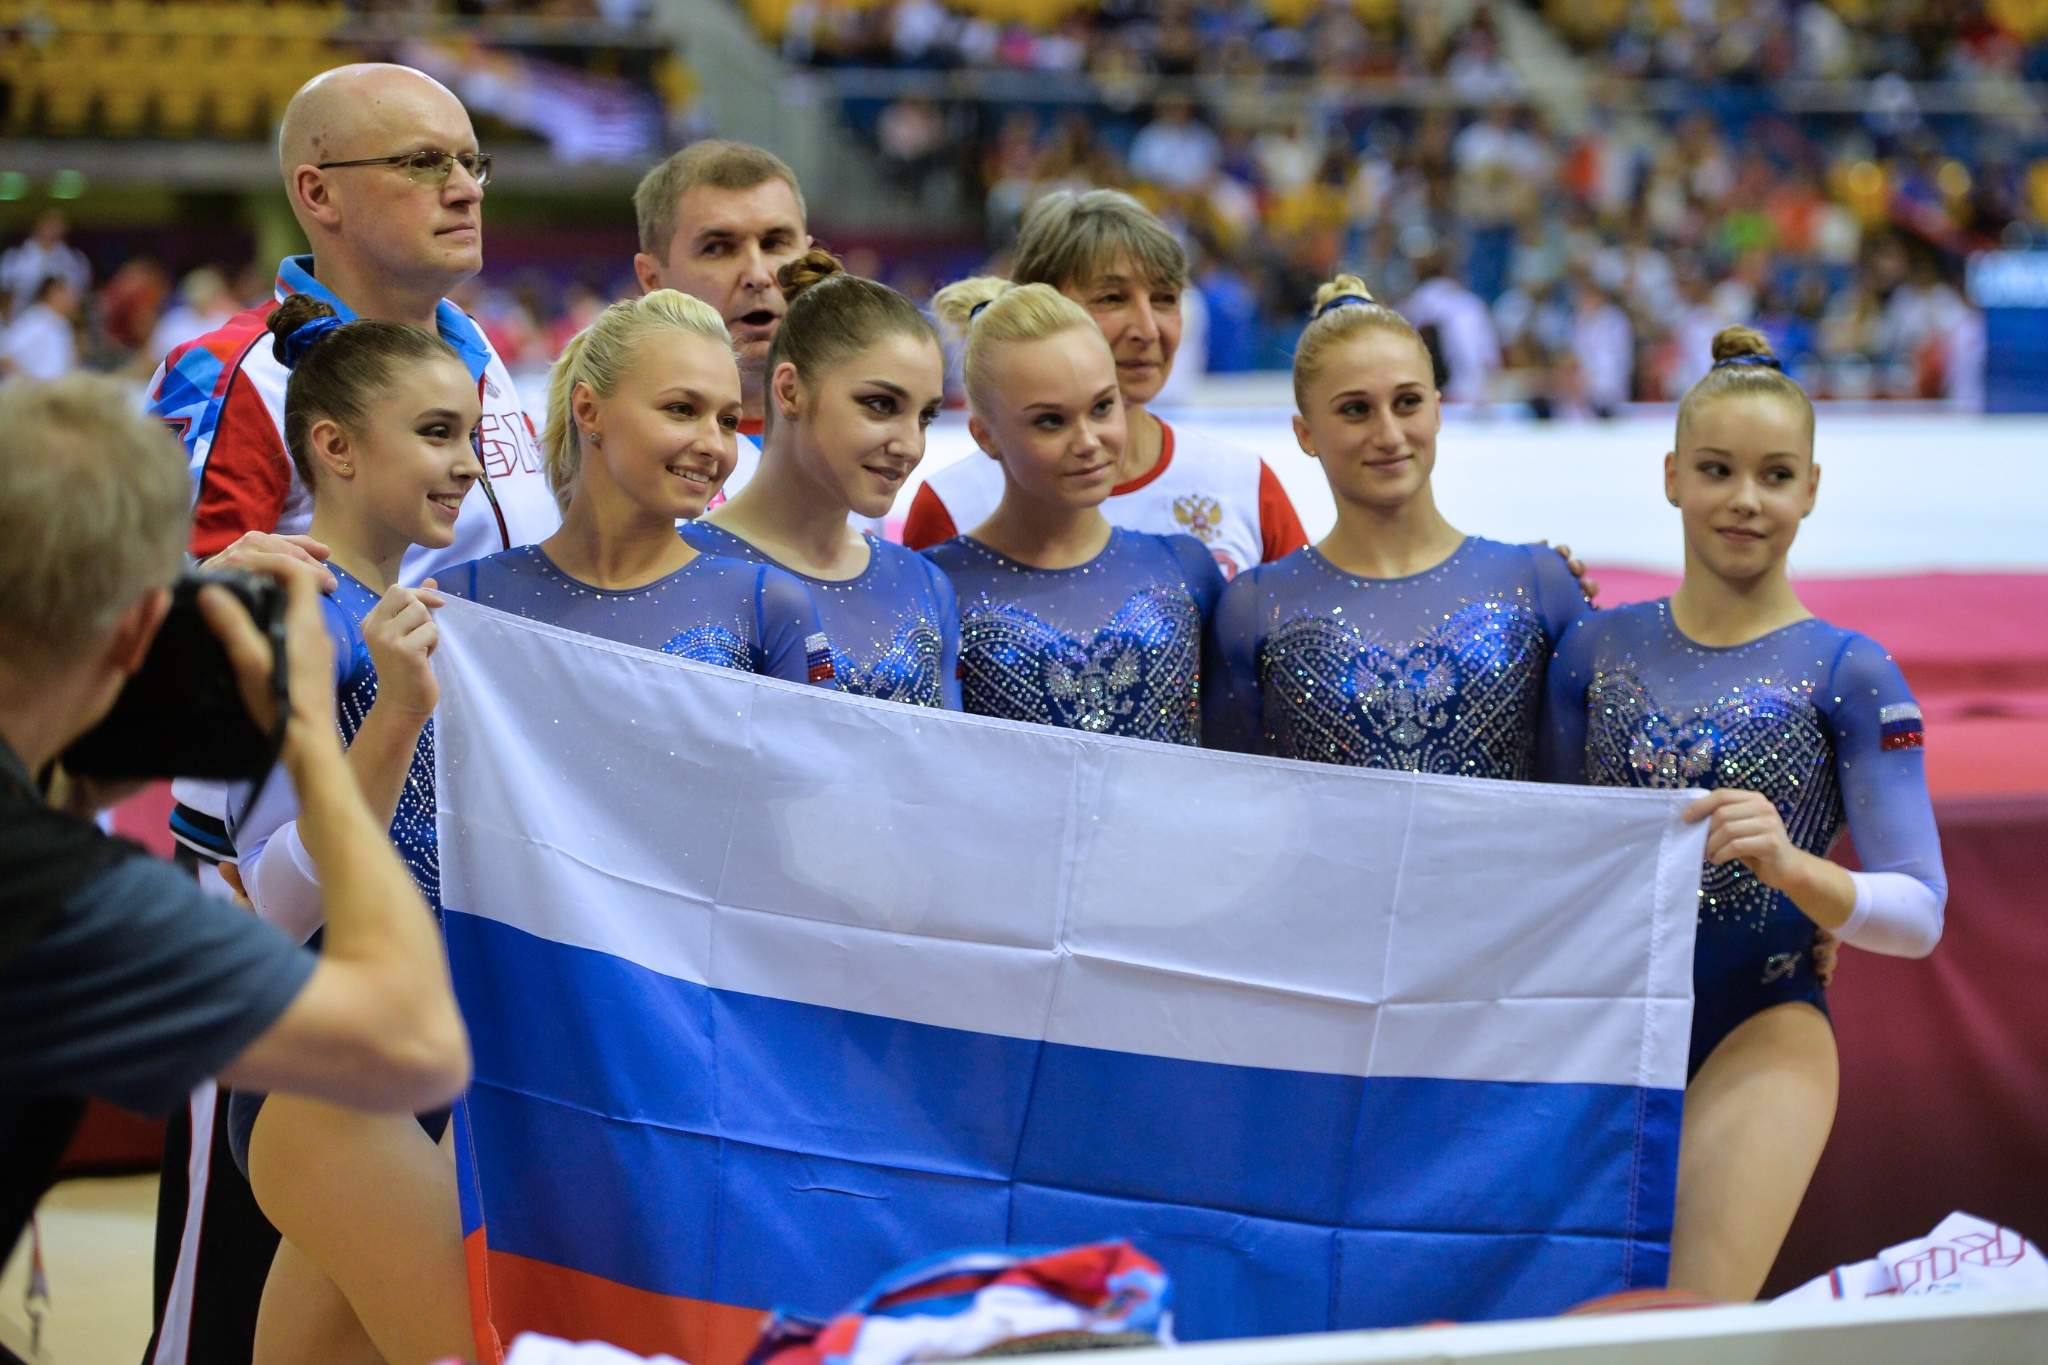 The Russian women's artistic gymnastics team at the 2018 world championships.